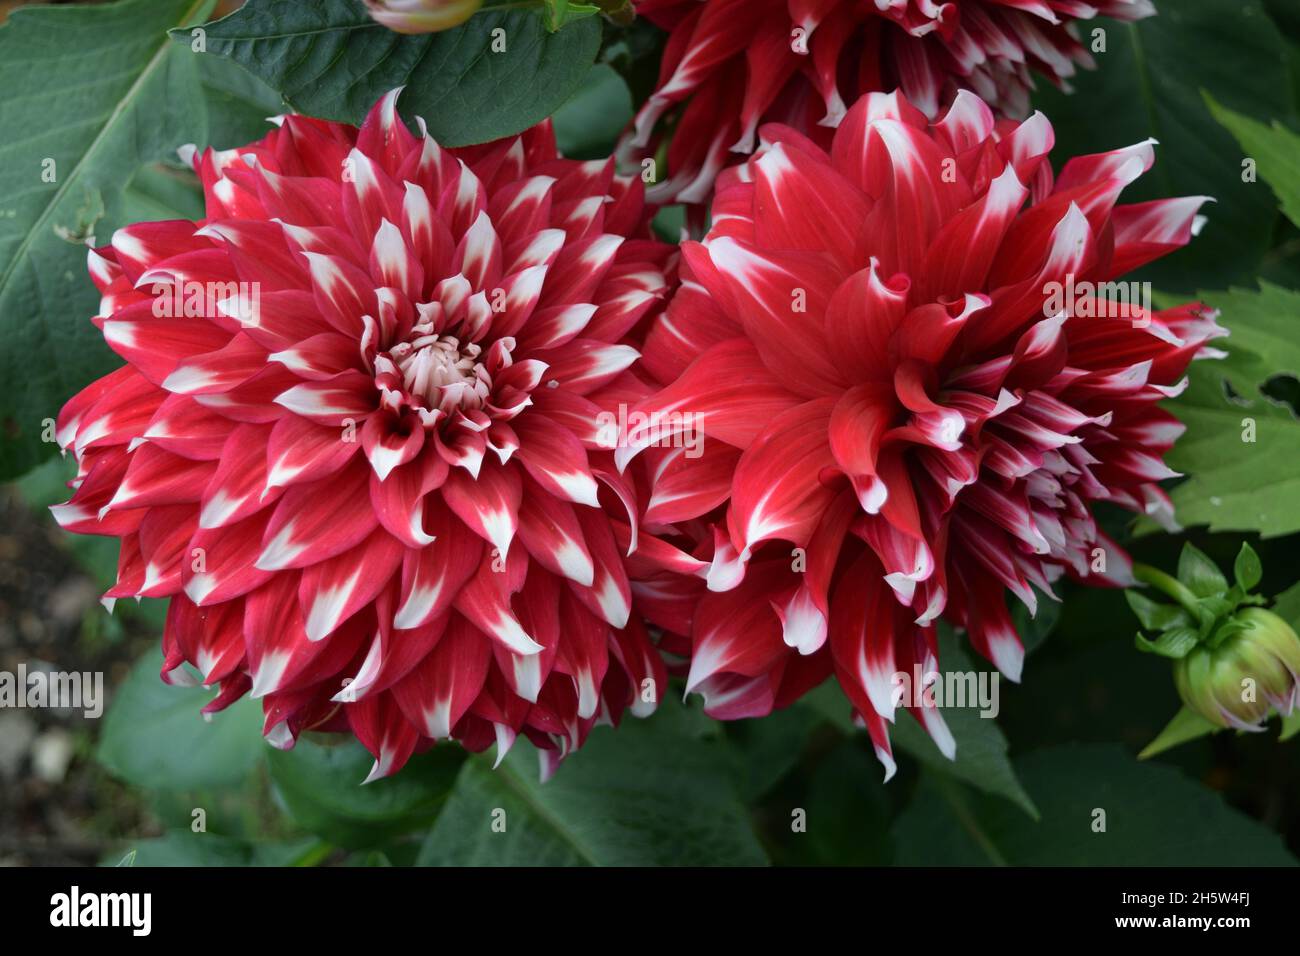 Dahlia Dinnerplate. Name Special X Factor. Closeup of two flowers with red petals with white tips. Stock Photo